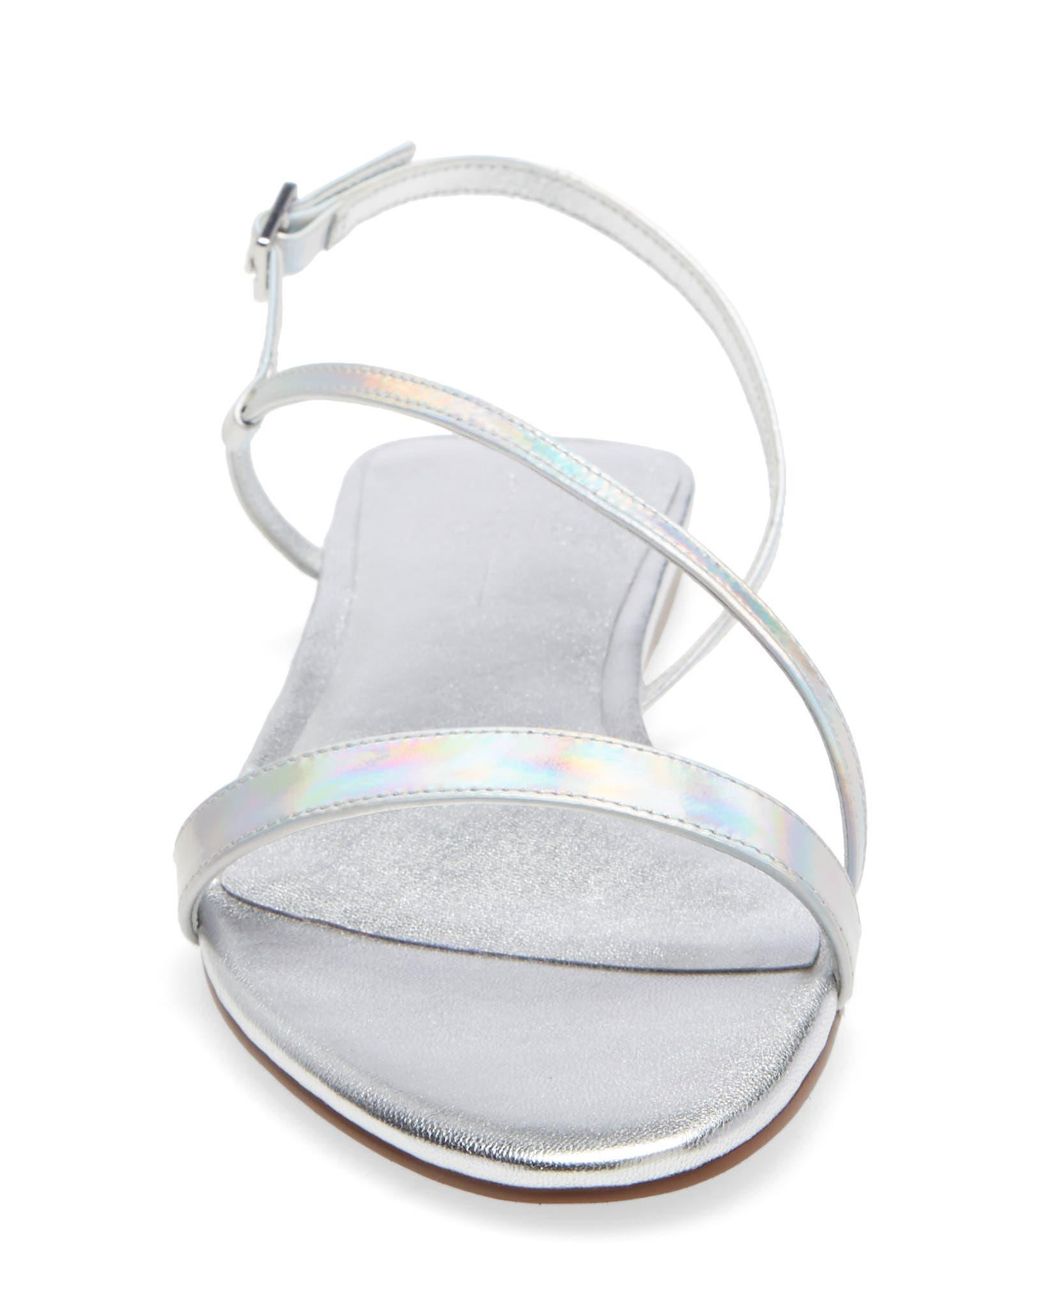 Linea Paolo Lauren Sandal In Silver Iridescent Leather At Nordstrom Rack in  White | Lyst